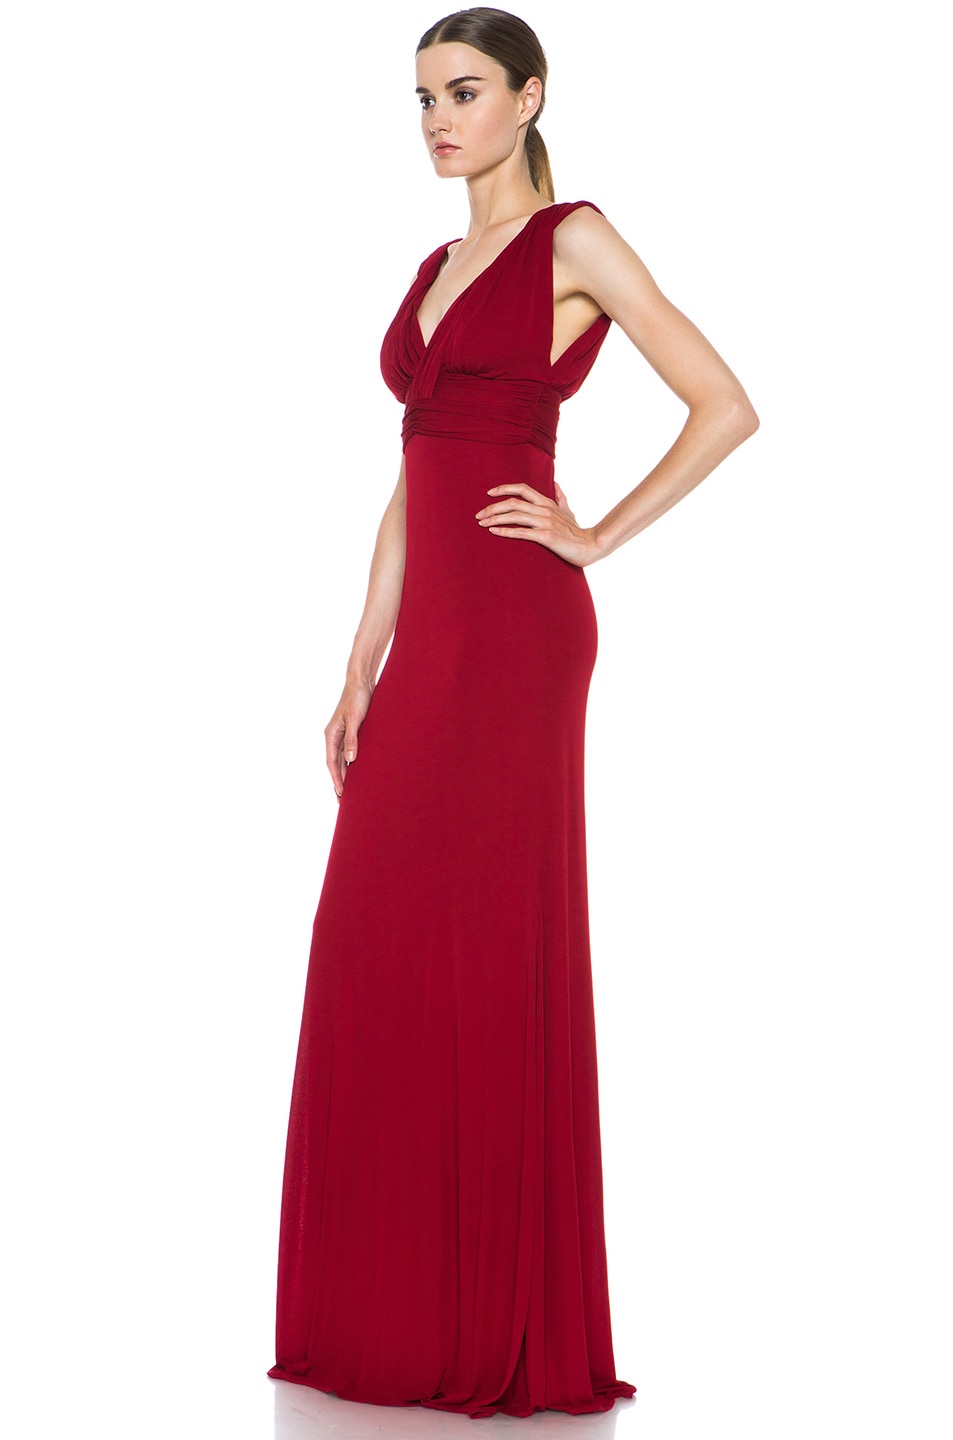 Issa Deep V Gown in Bordeaux | FWRD